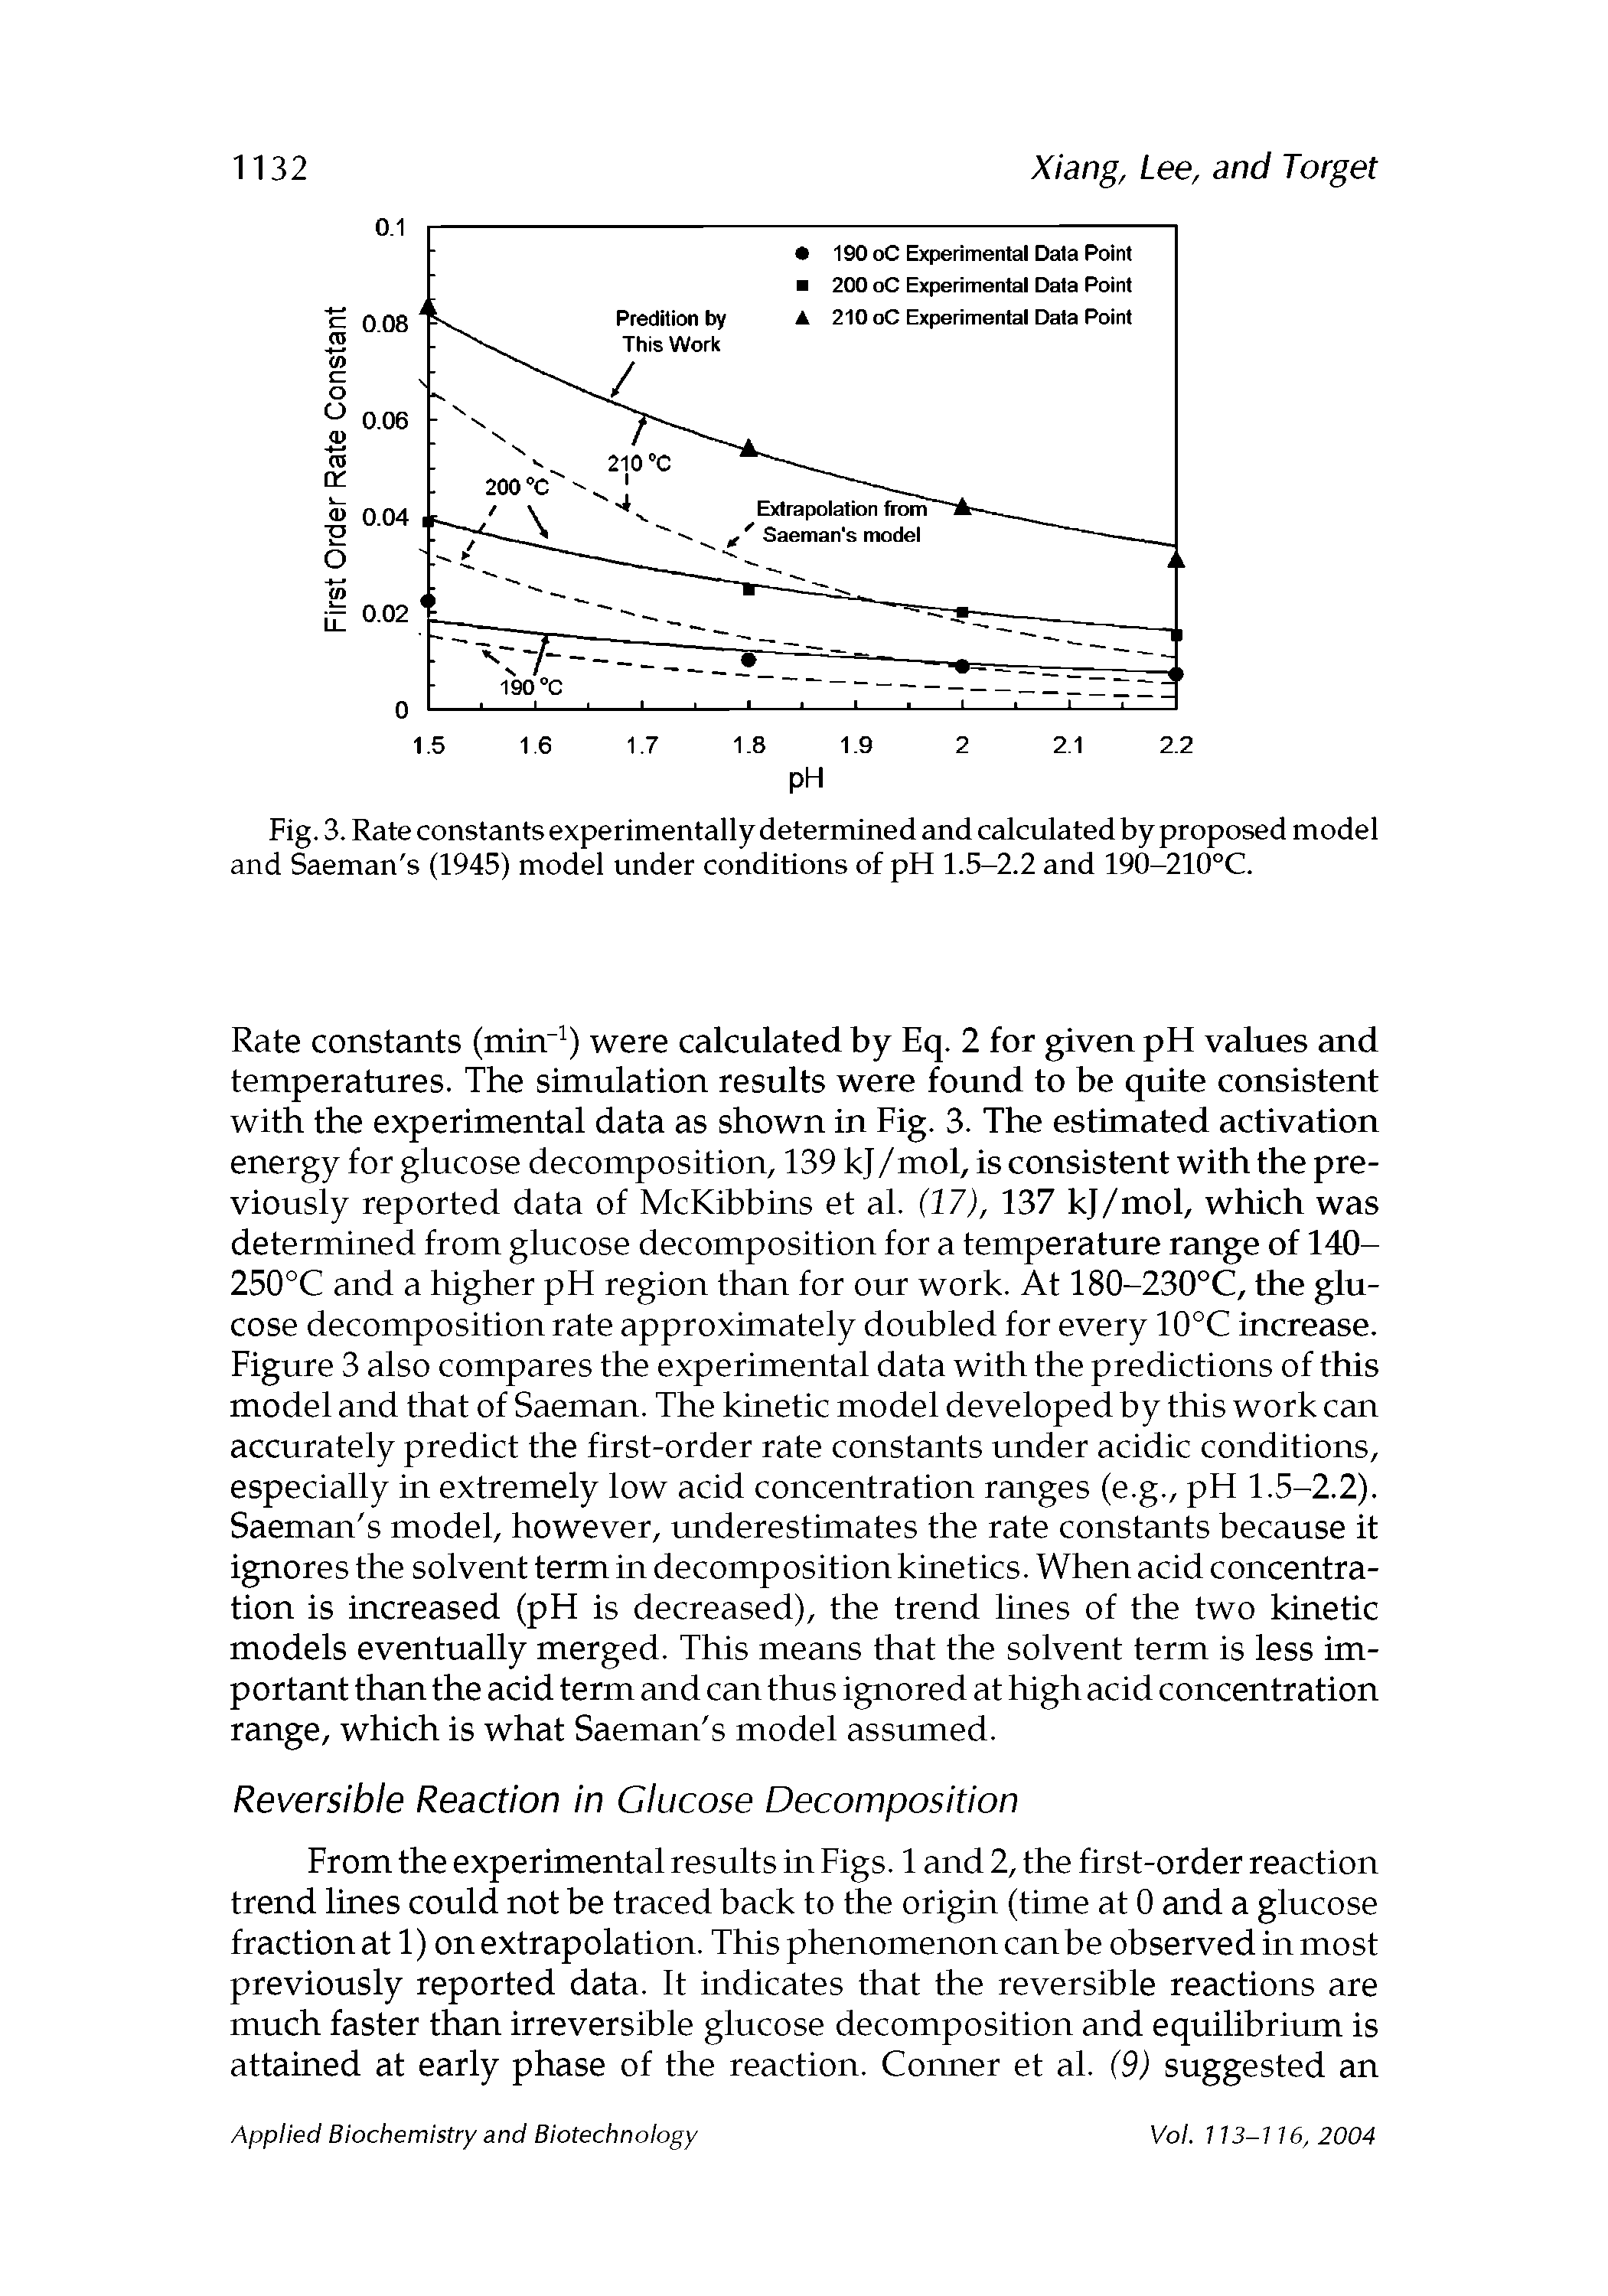 Fig. 3. Rate constants experimentally determined and calculated by proposed model and Saeman s (1945) model under conditions of pH 1.5-2.2 and 190-210°C.